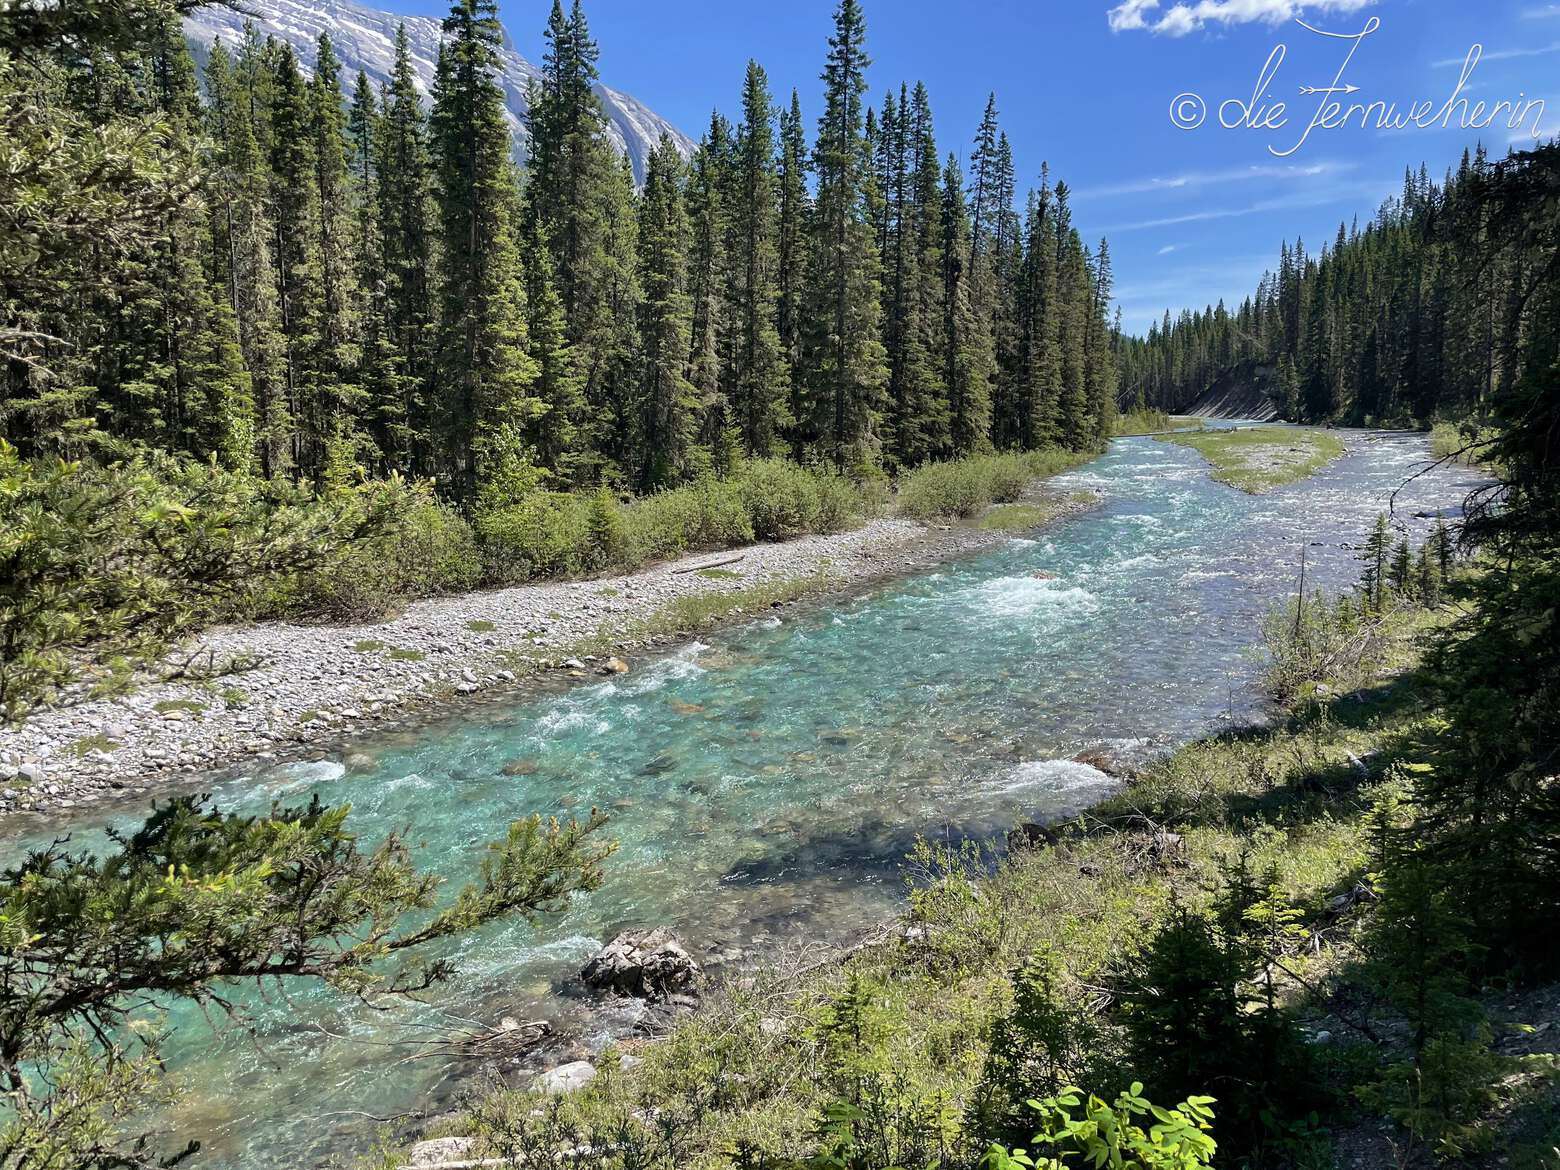 Crystal-clear Spray River as it threads through the forest on the outskirts of the town of Banff.